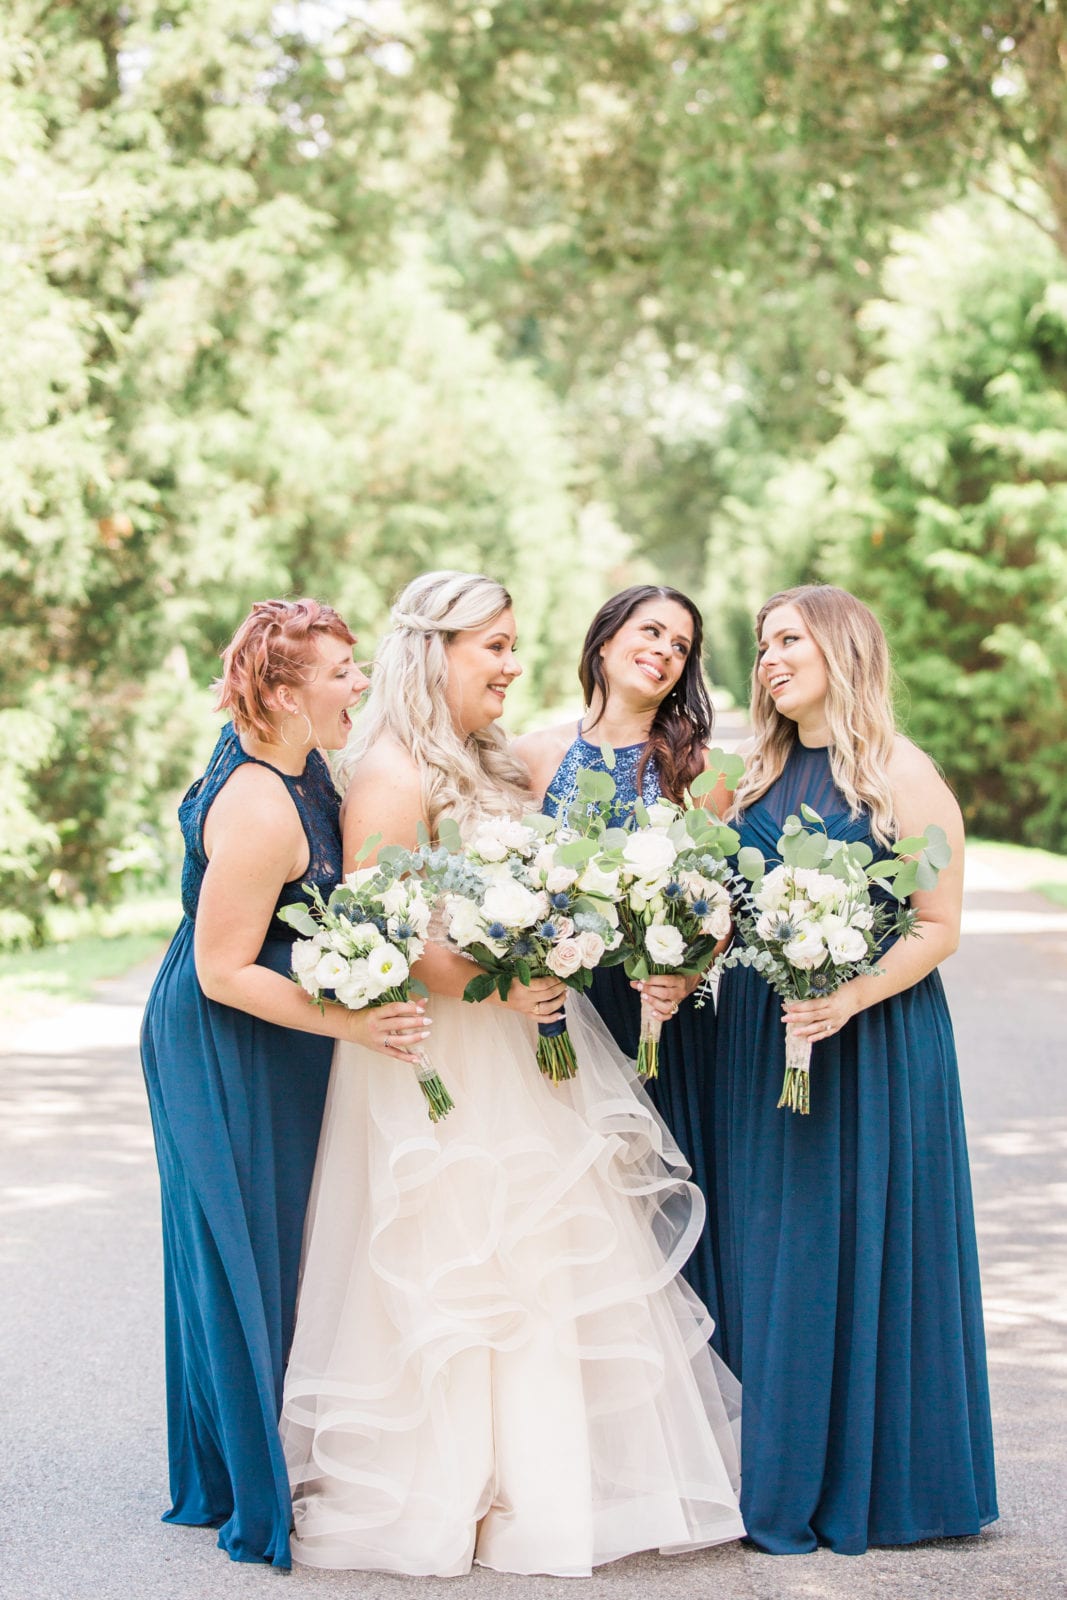 Jefferson Patterson Park Wedding | Birds of a Feather Photography Blog